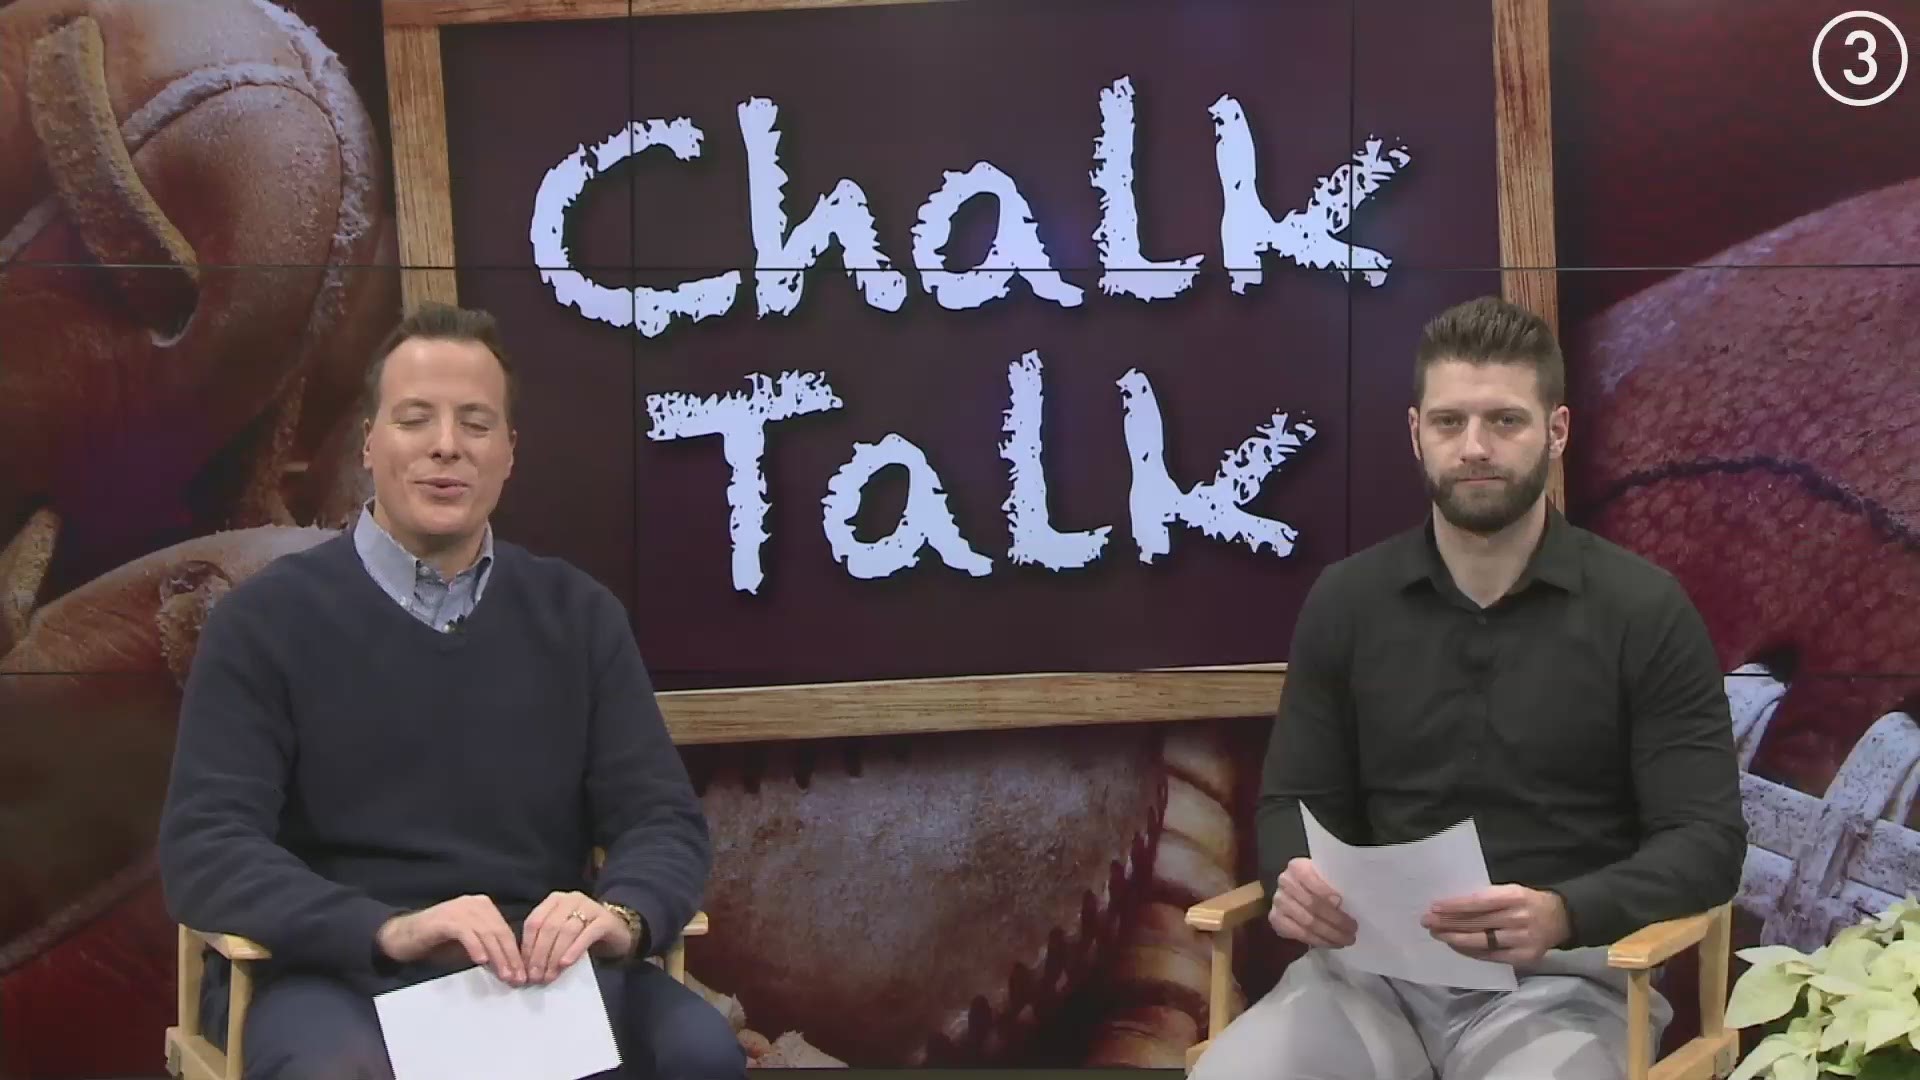 On the 14th episode of WKYC's Chalk Talk, Nick Camino and Ben Axelrod discuss and make their picks for Week 15 of the college football season and Week 14 of the NFL.